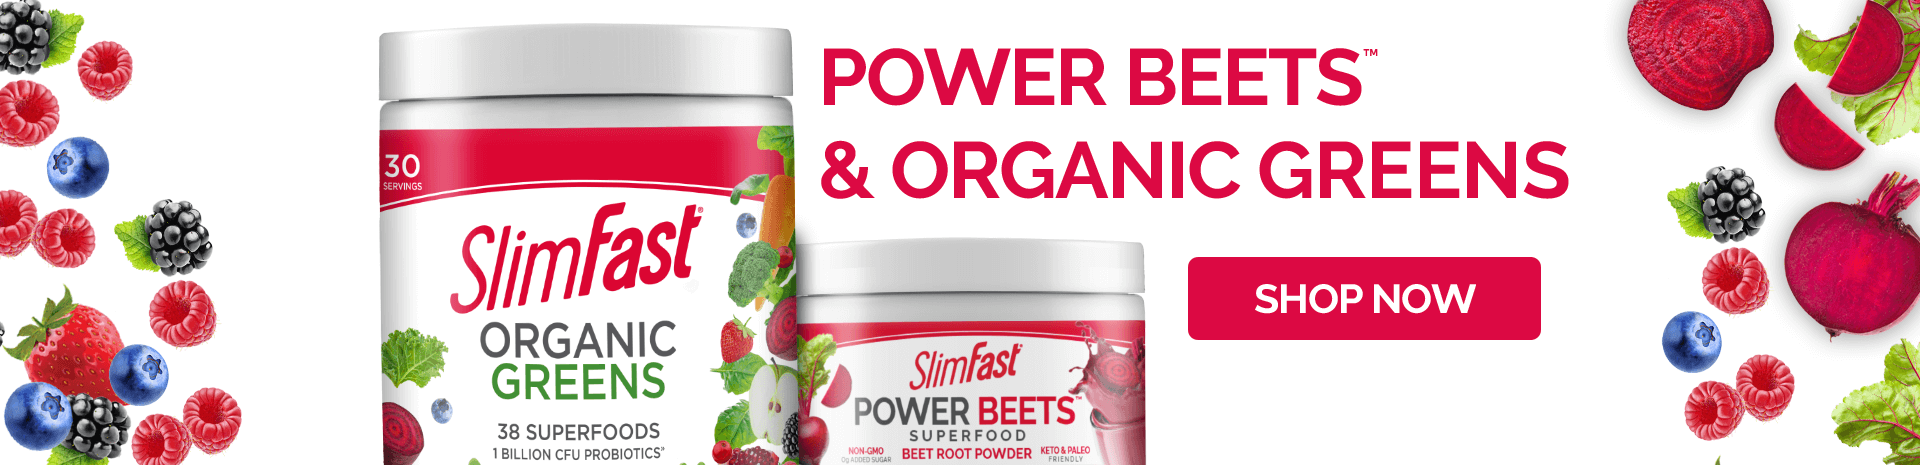 SlimFast Power Beets and Greens Now Available